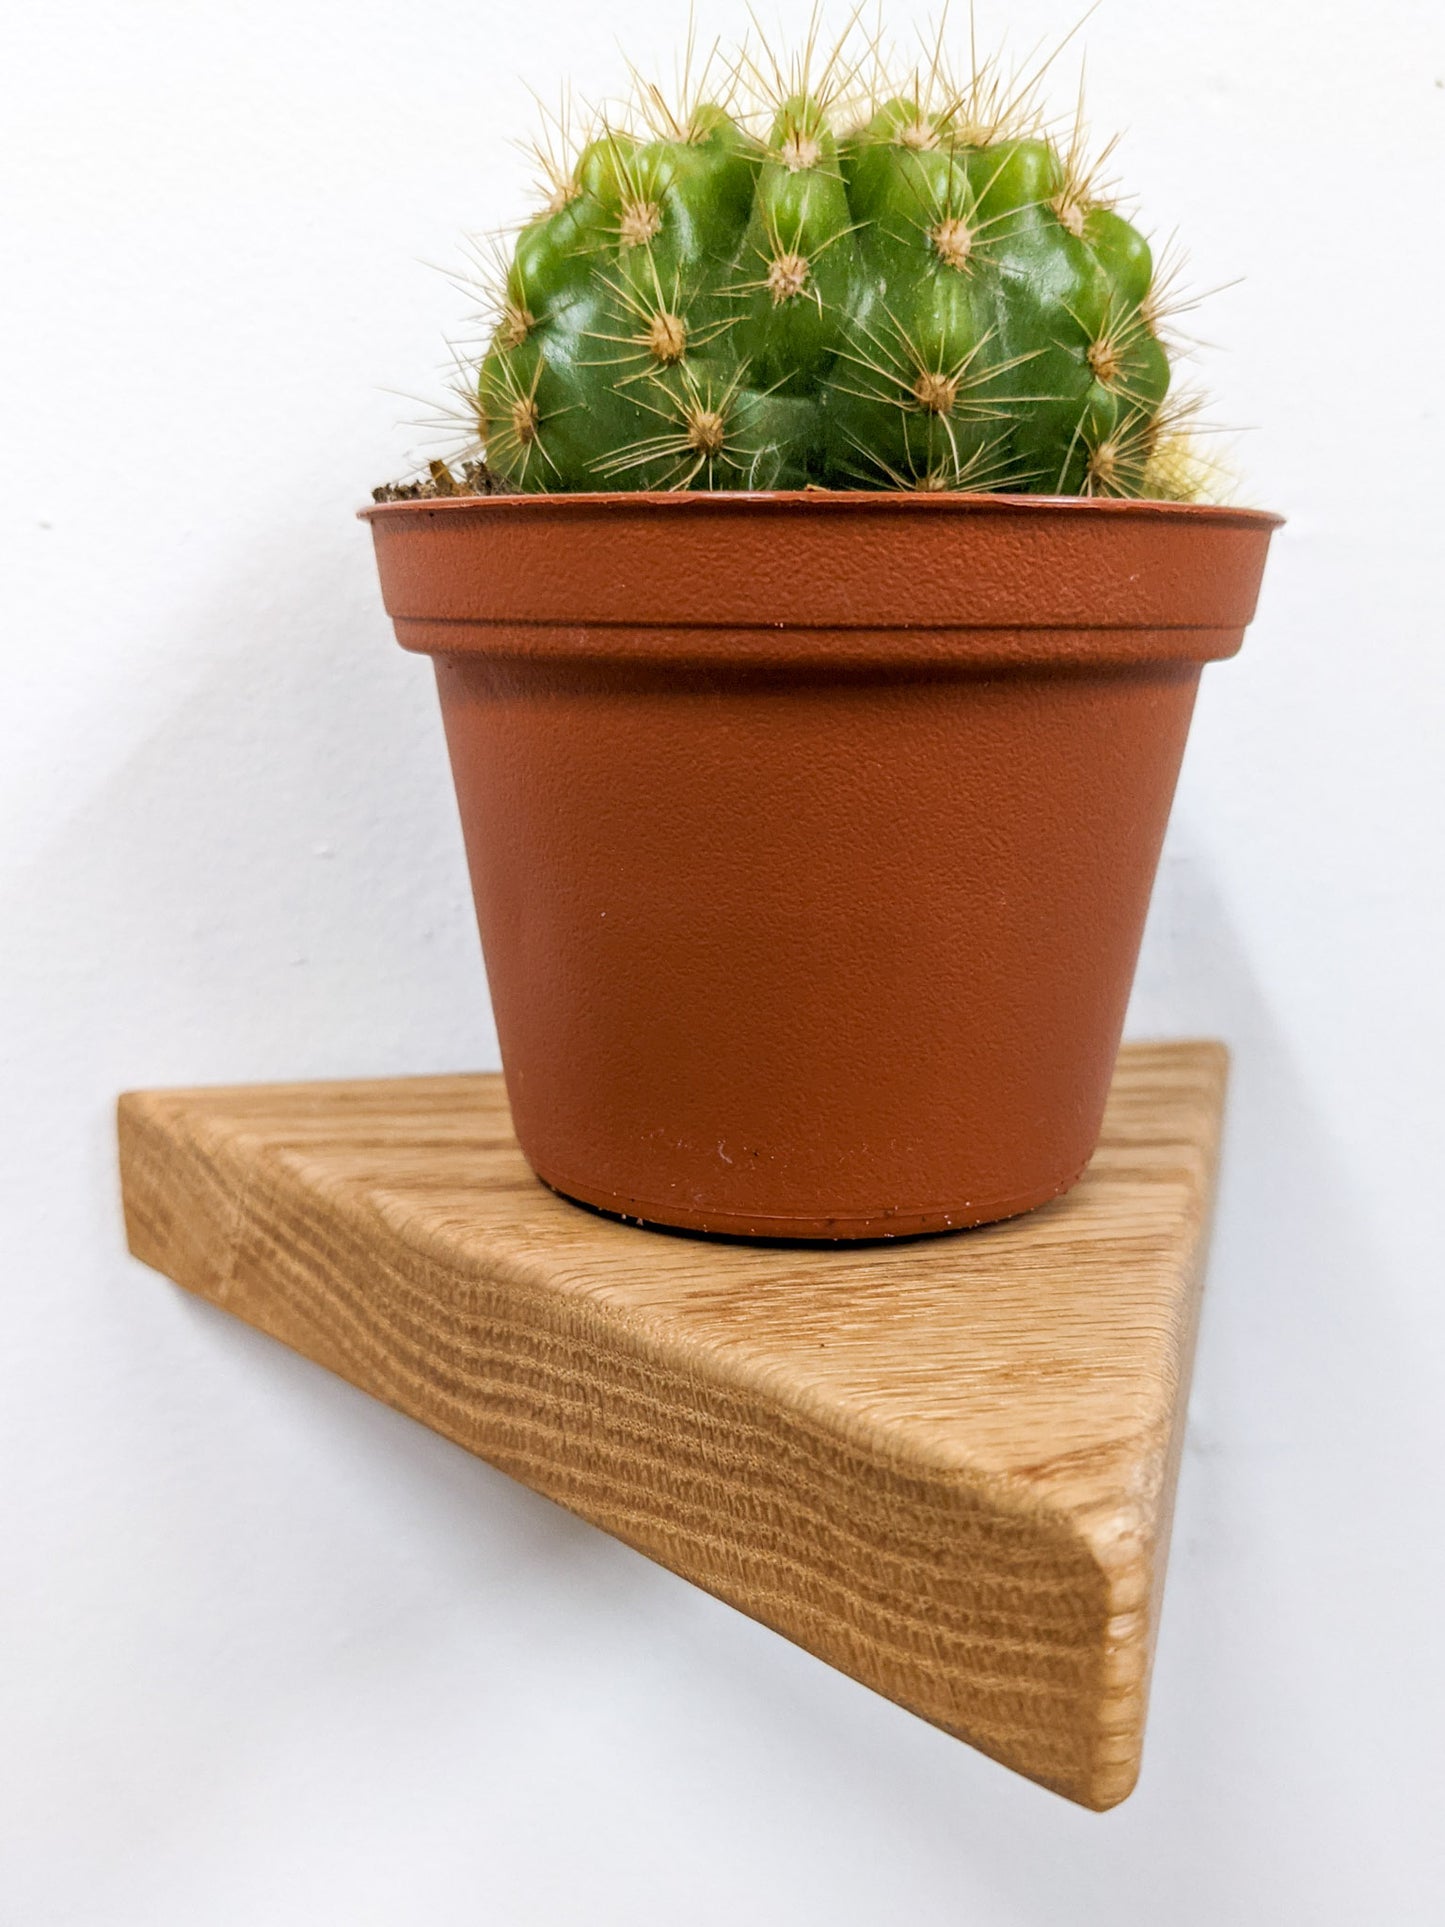 A head-on view of the sharp angles and slightly rounded corners of the small oak triangle floating shelf. A cactus sits on the top of the shelf.